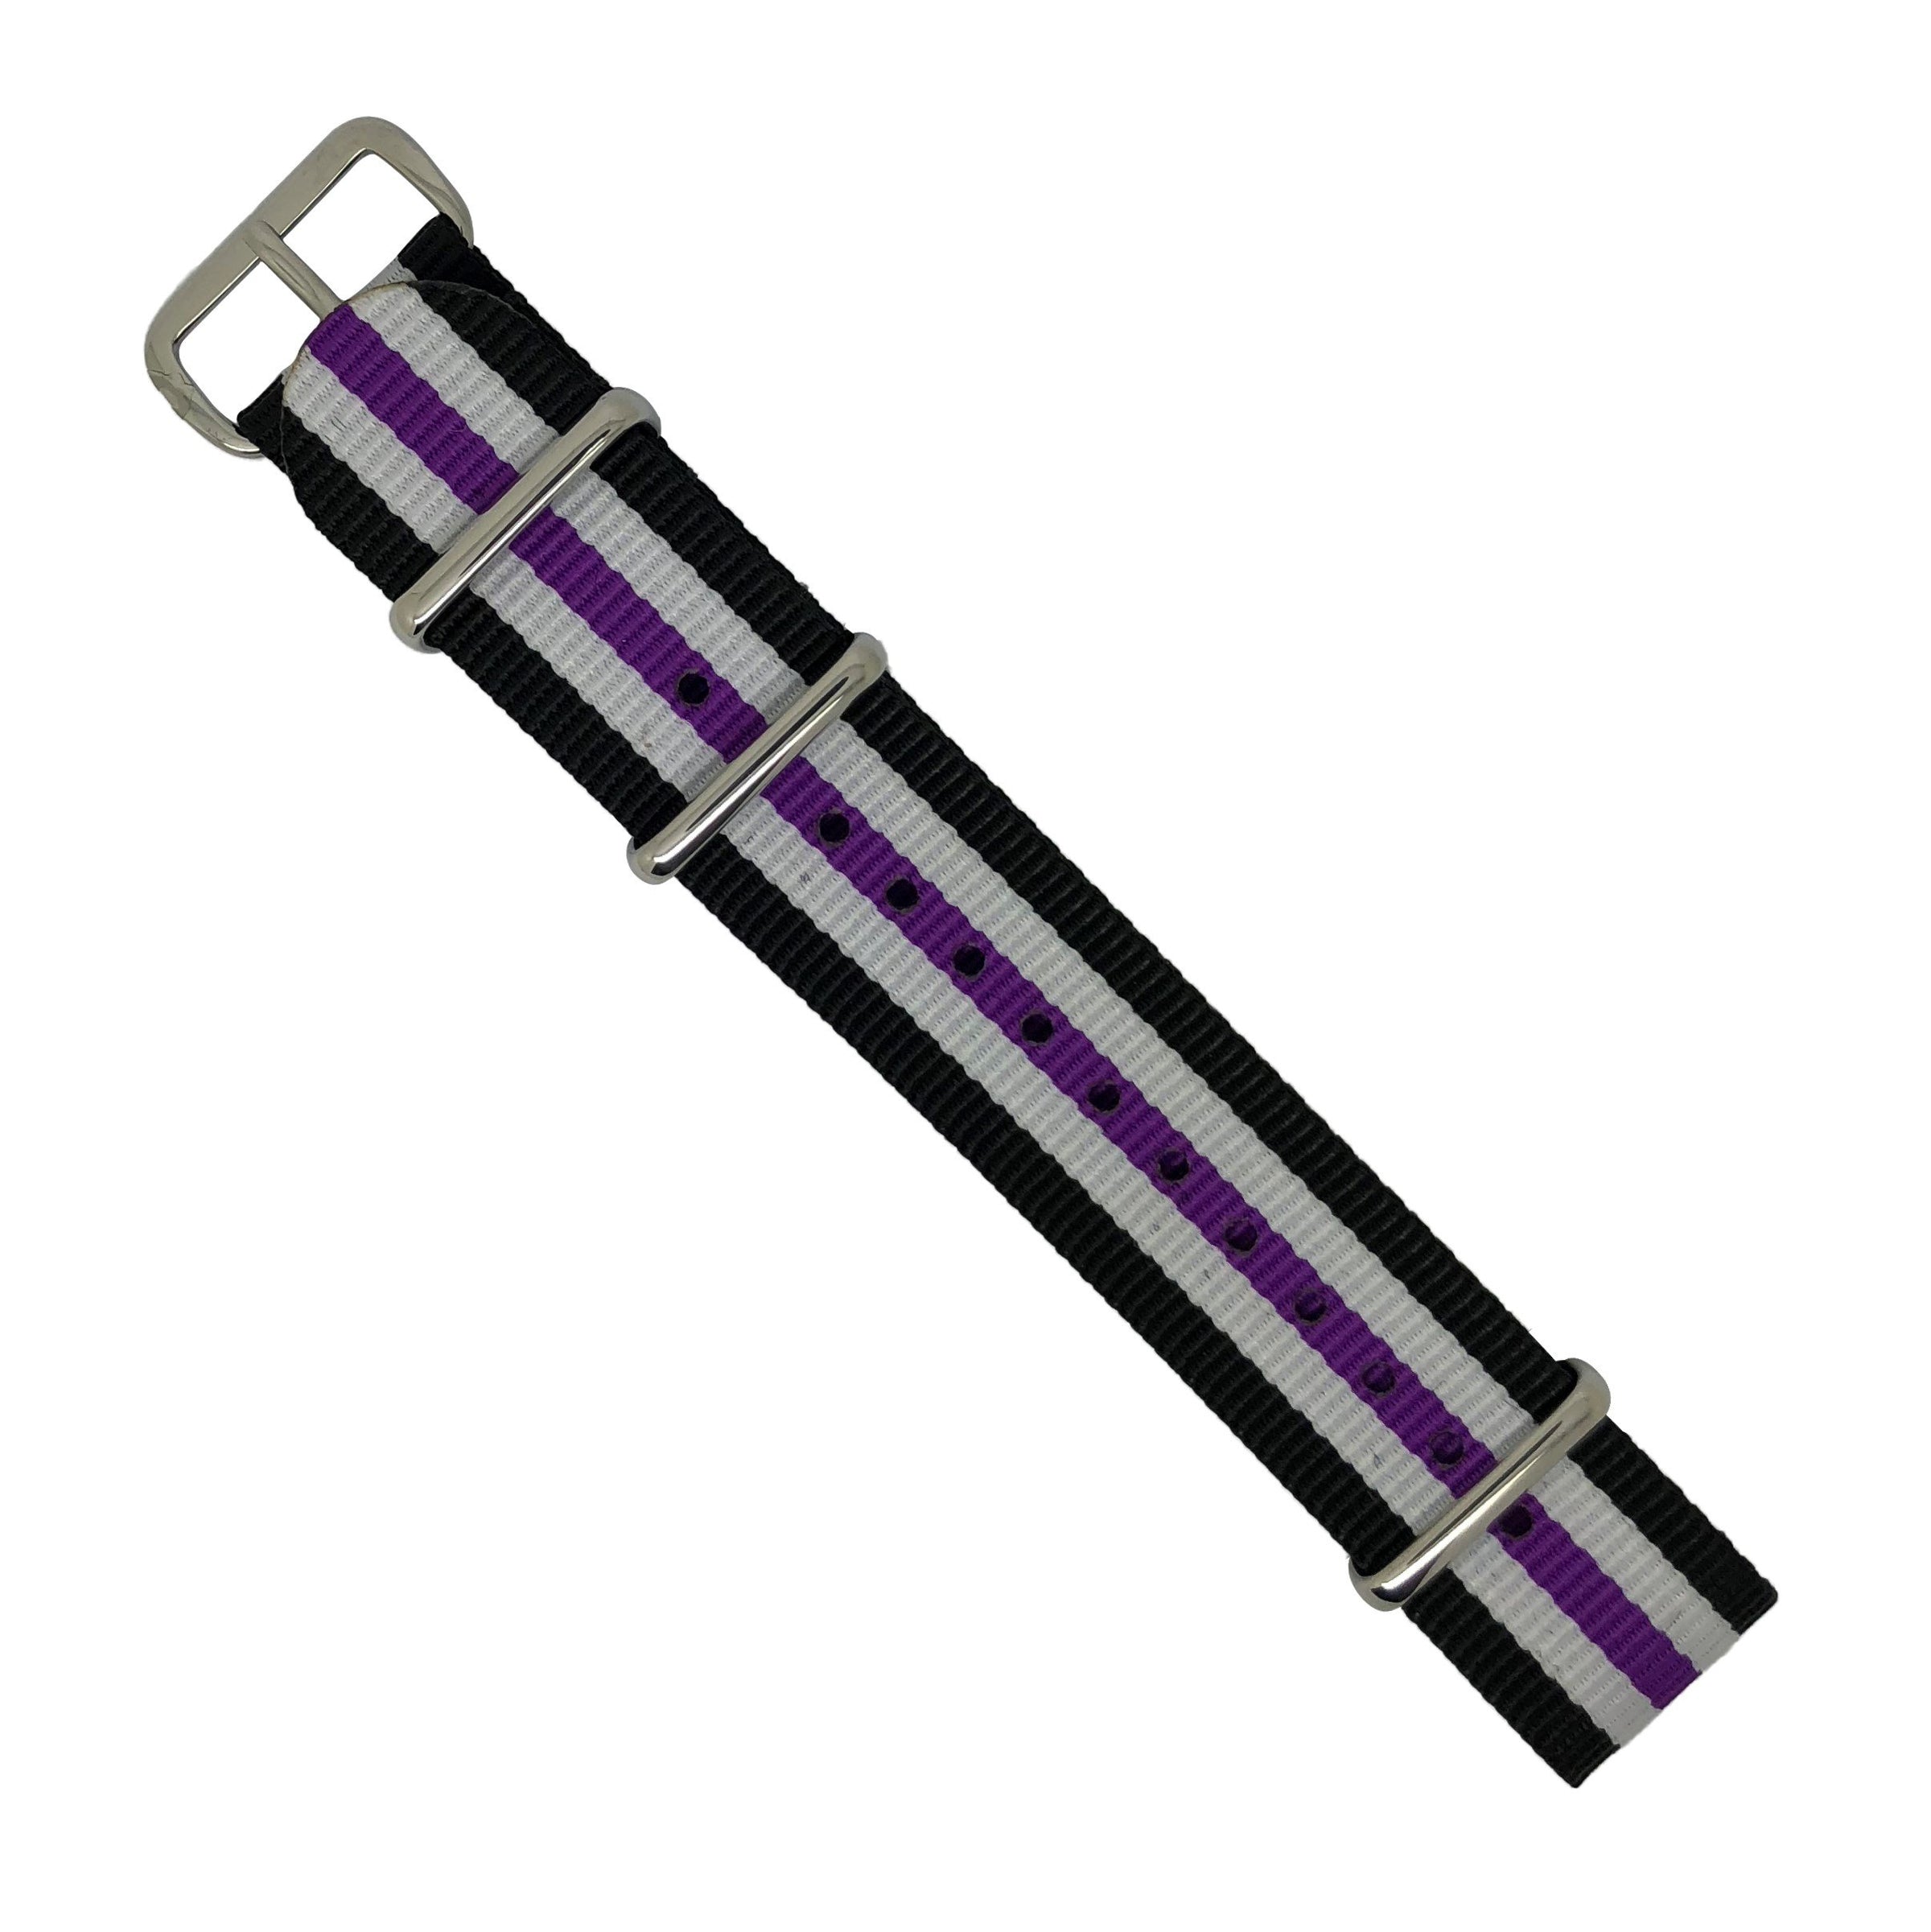 Premium Nato Strap in Regimental Purple with Polished Silver Buckle (20mm) - Nomad Watch Works Malaysia